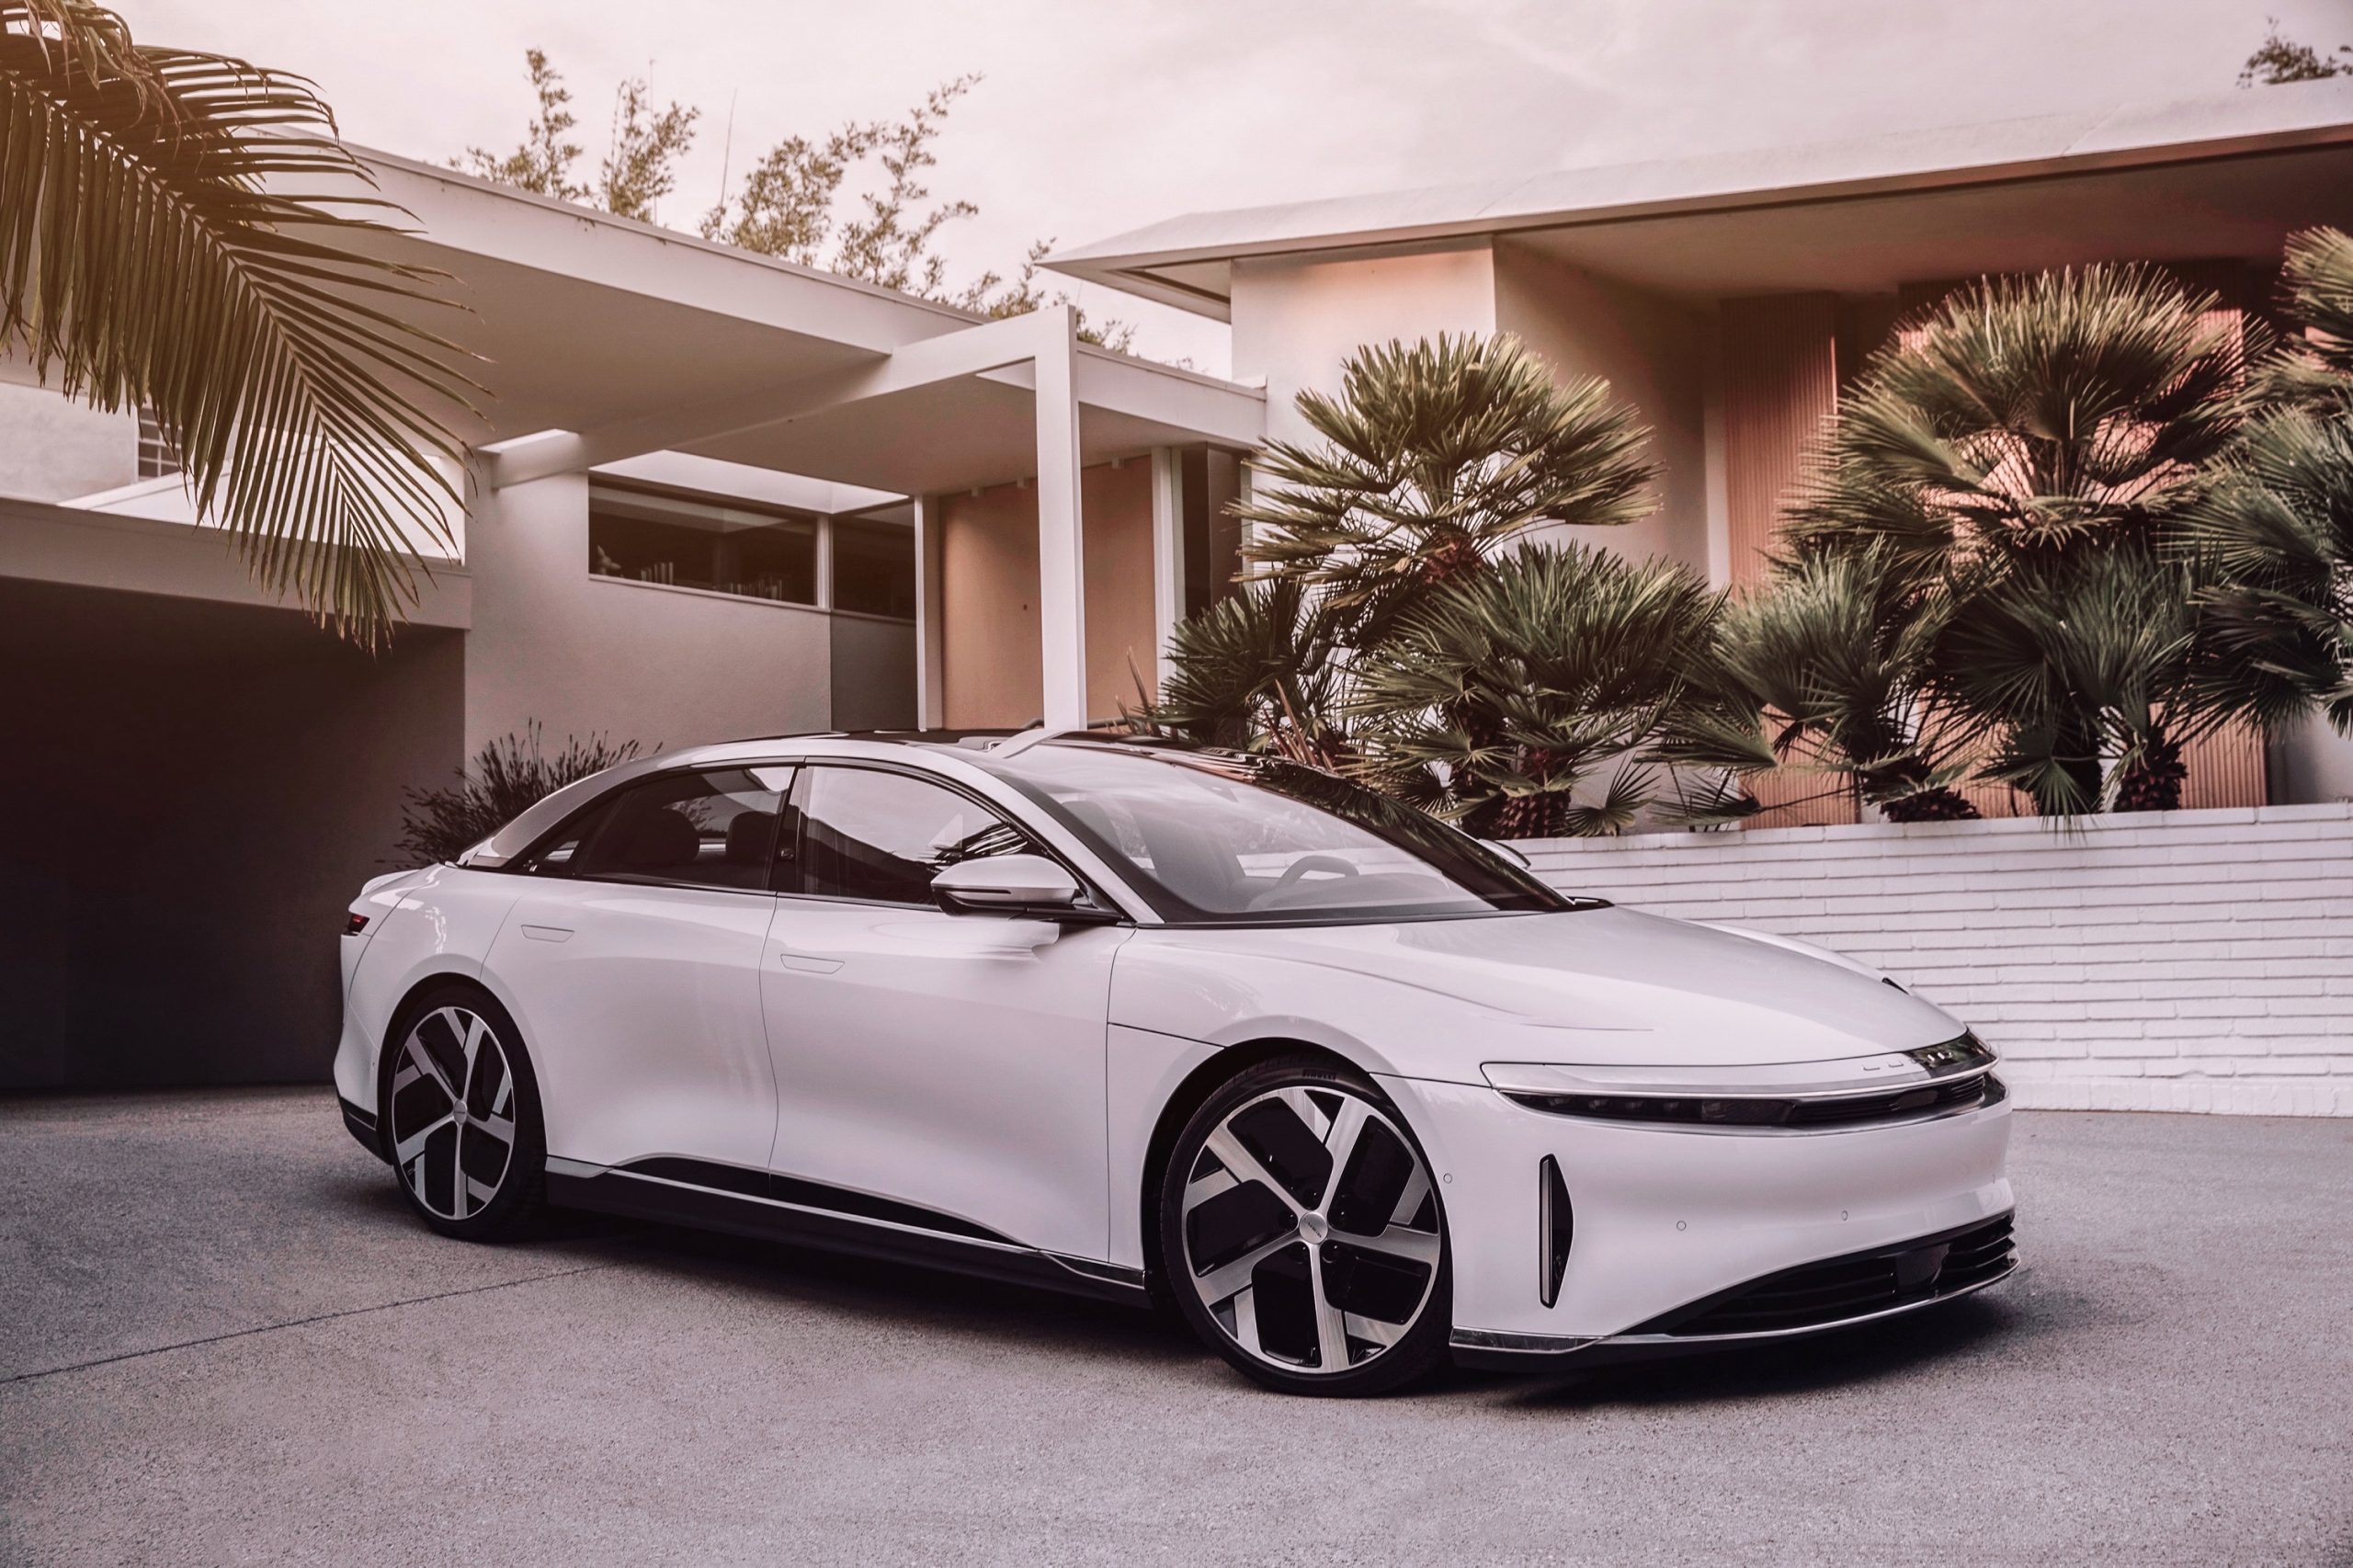 A white Lucid Air luxury EV shot from the front 3/4 angle in a driveway with palms in the background